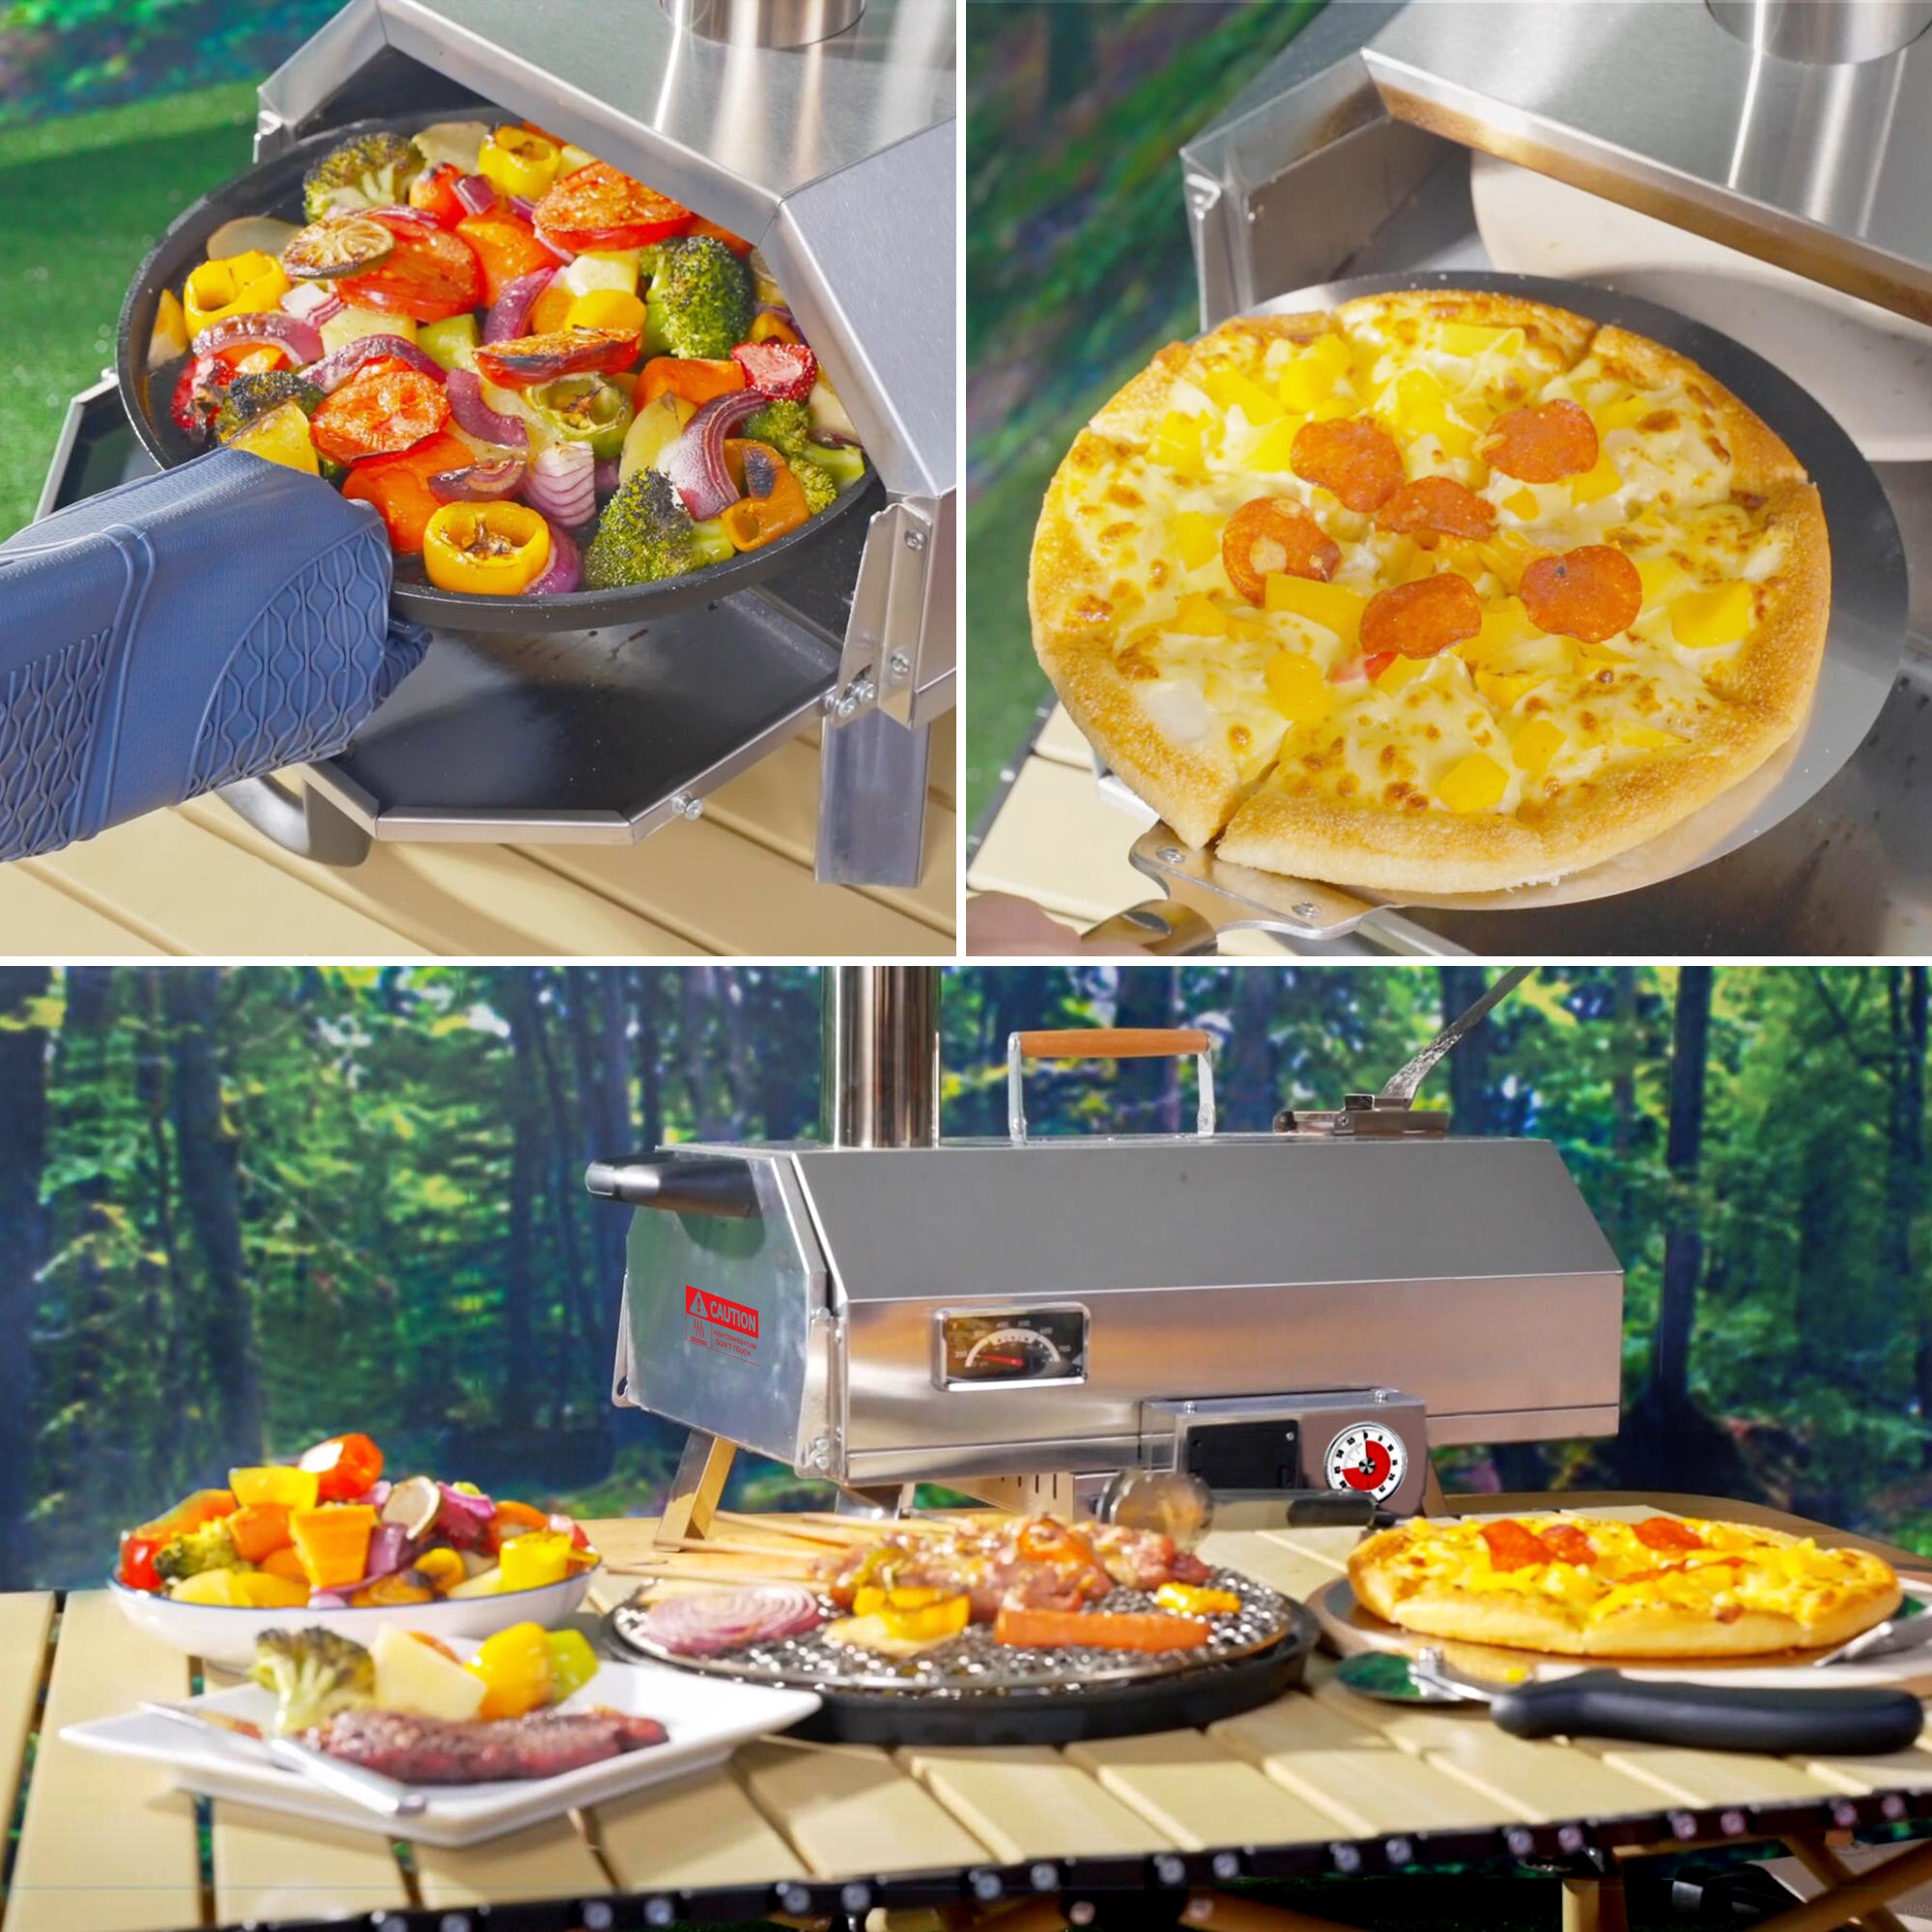 Stainless Steel Pizza Oven Outdoor 12" Automatic Rotatable Pizza Ovens Portable Wood Fired Pizza Oven Pizza Maker with Timer